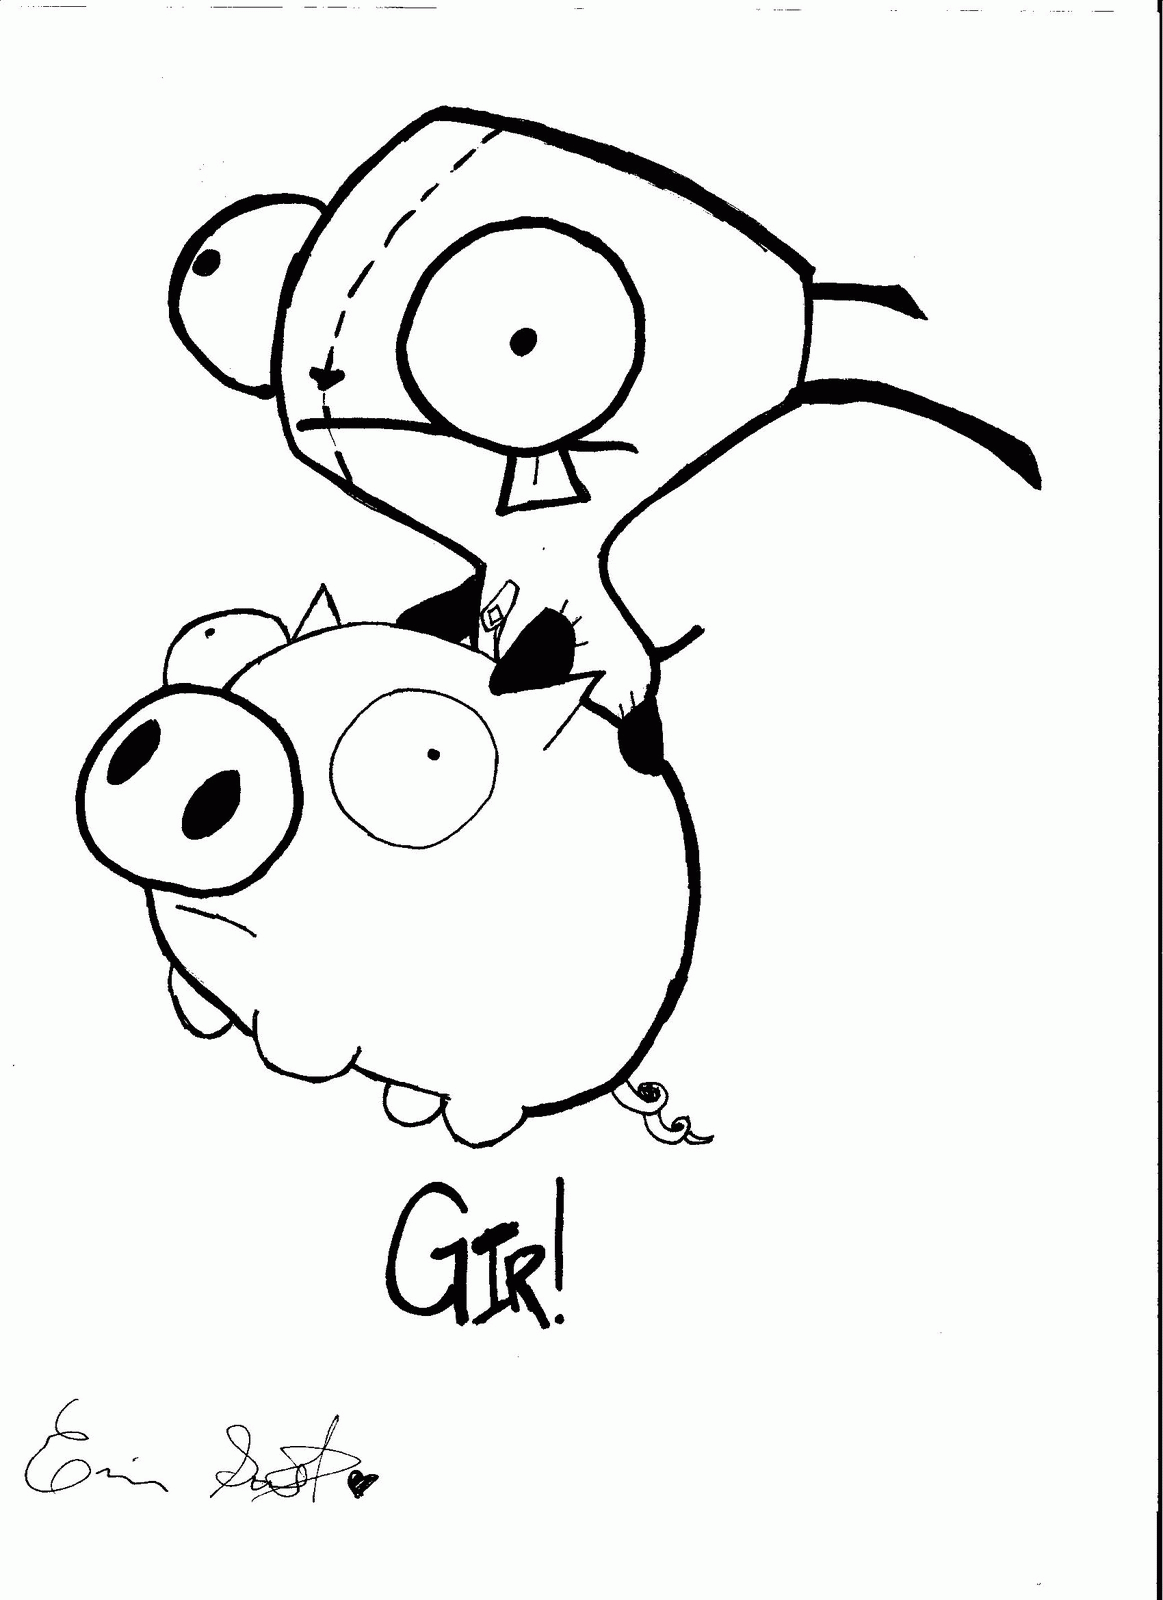 Invader zim gir printable coloring pages